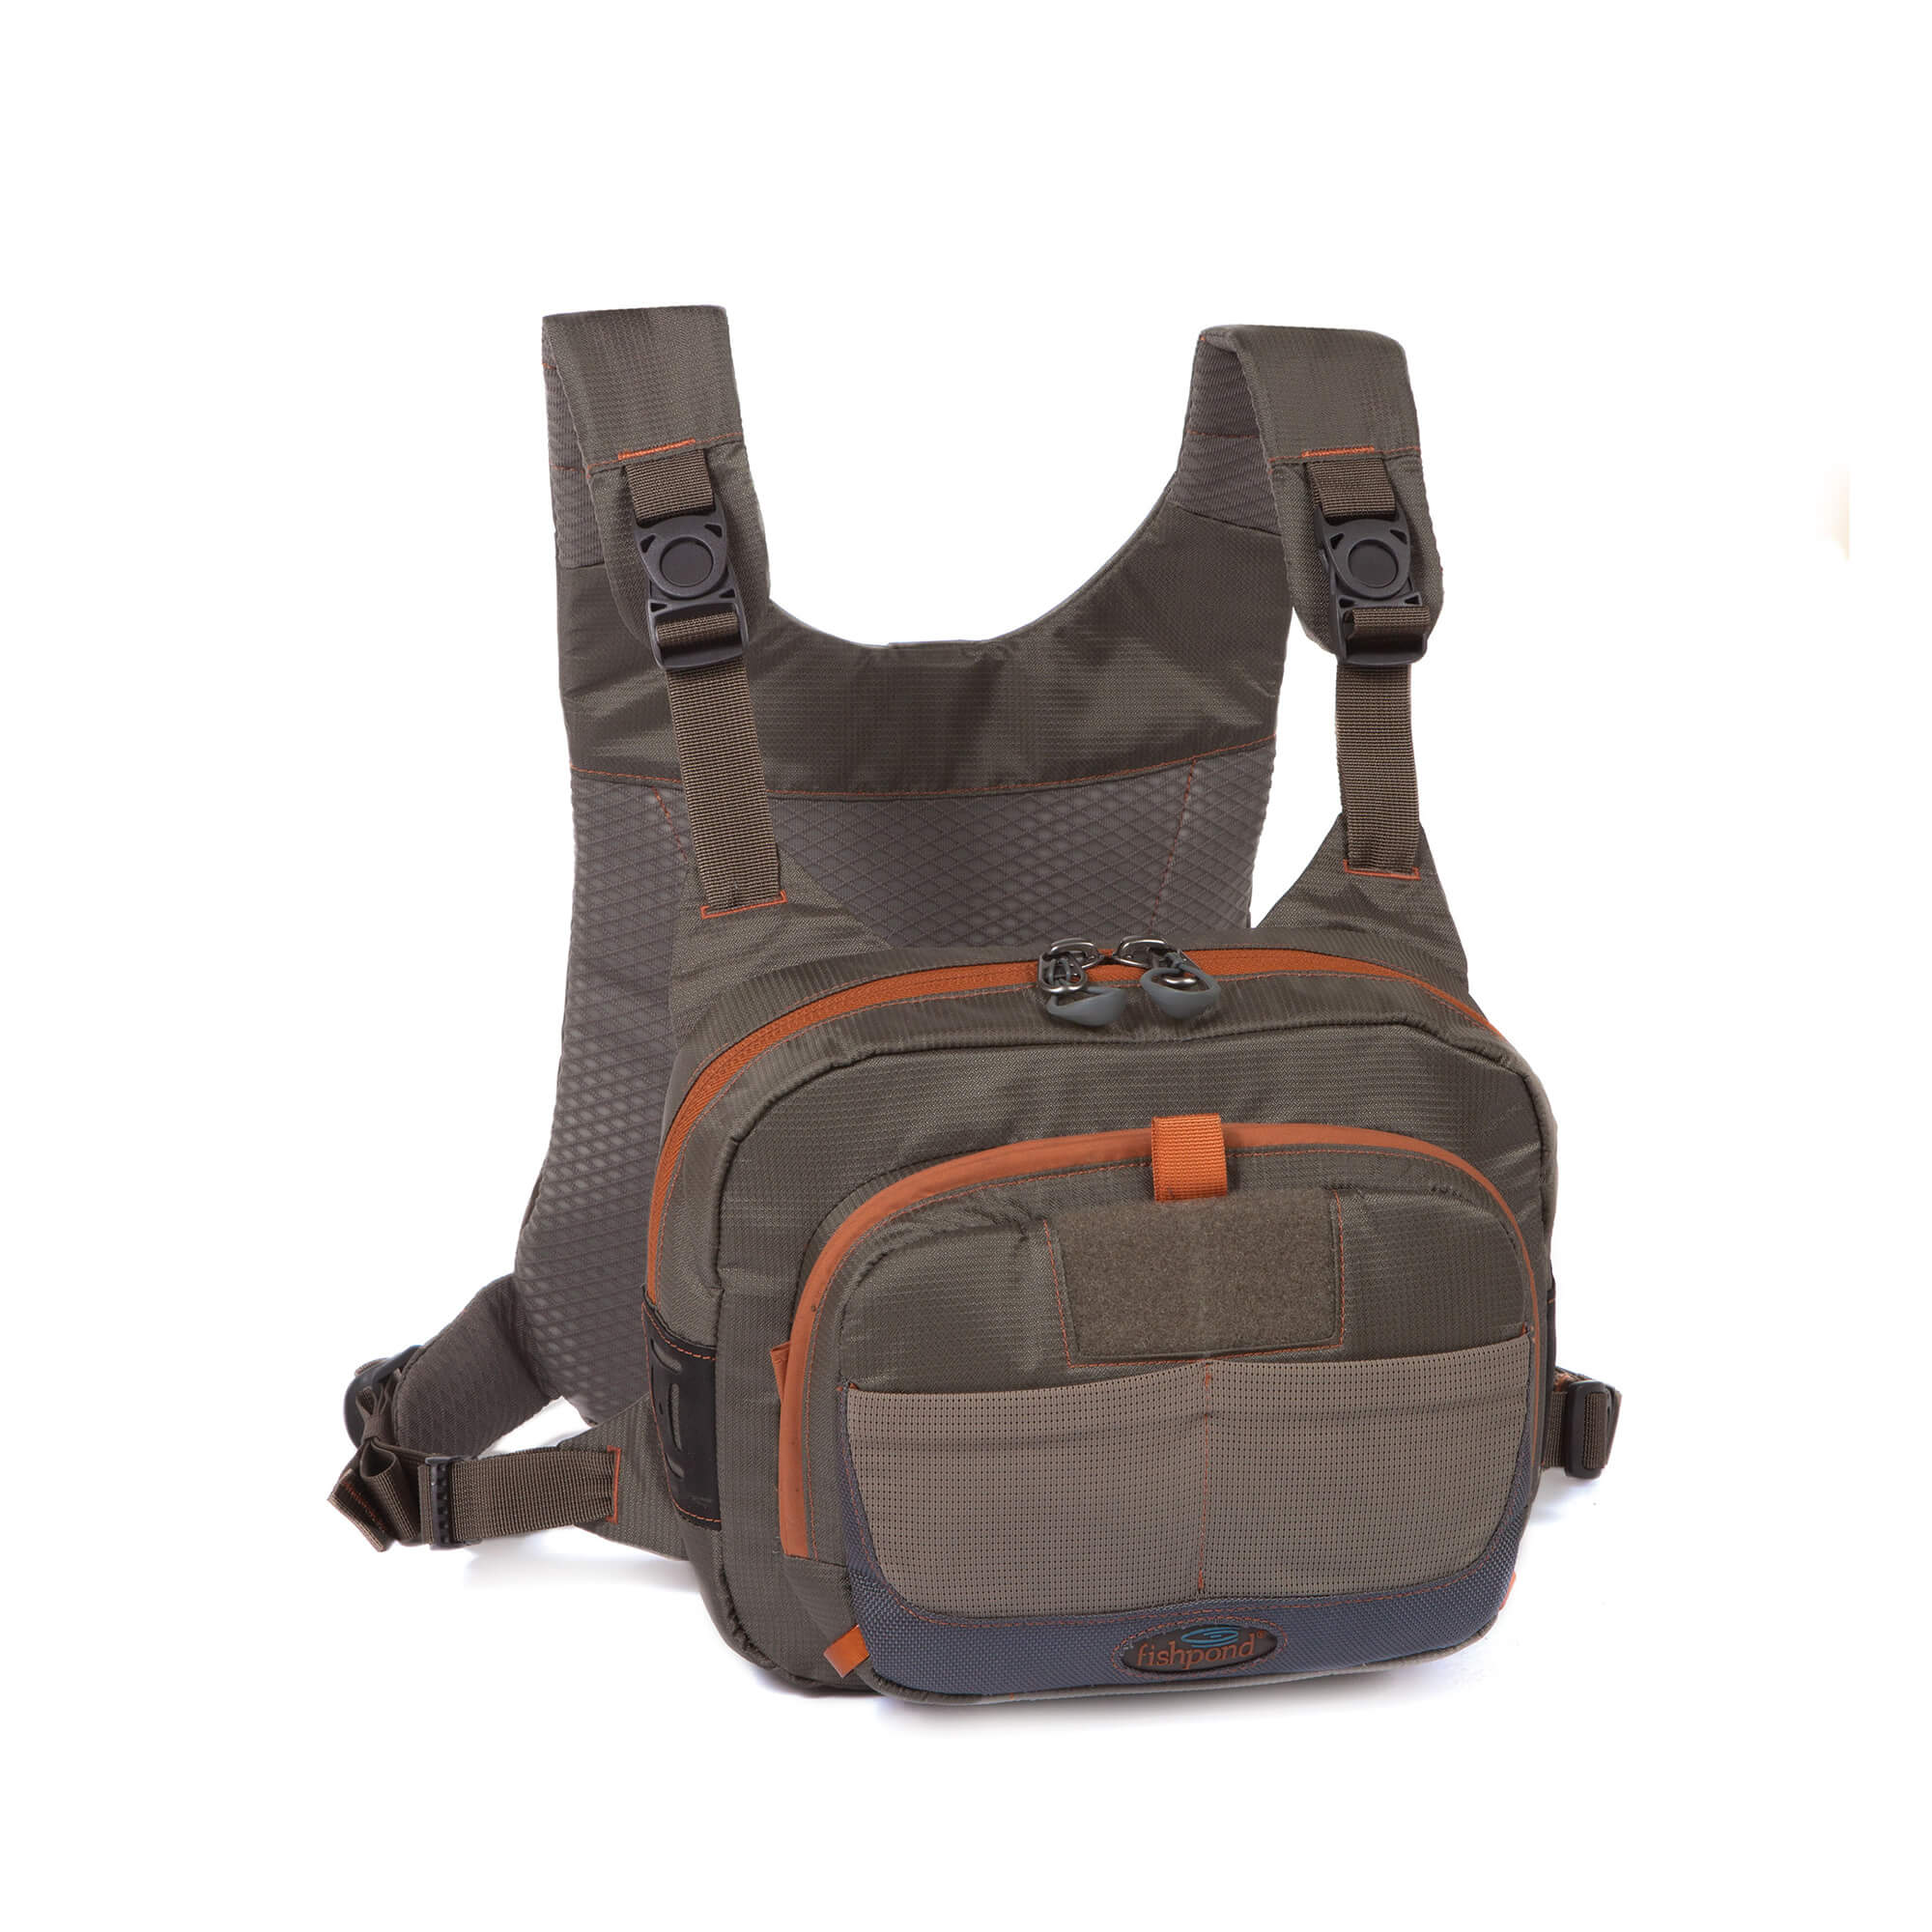 Fishpond Cross Current Chest Pack System – Guide Flyfishing